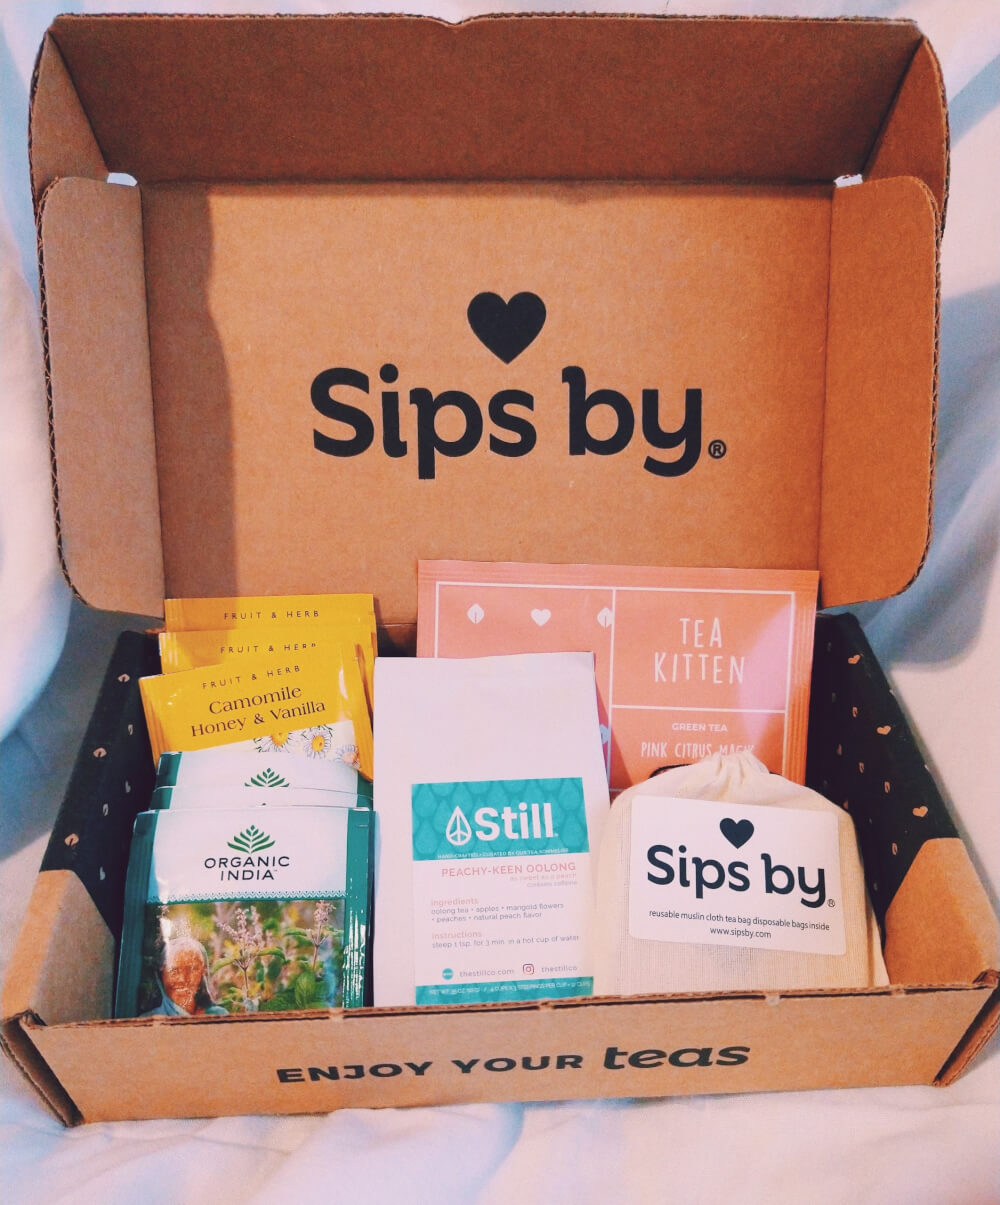 Sips by box displaying teas